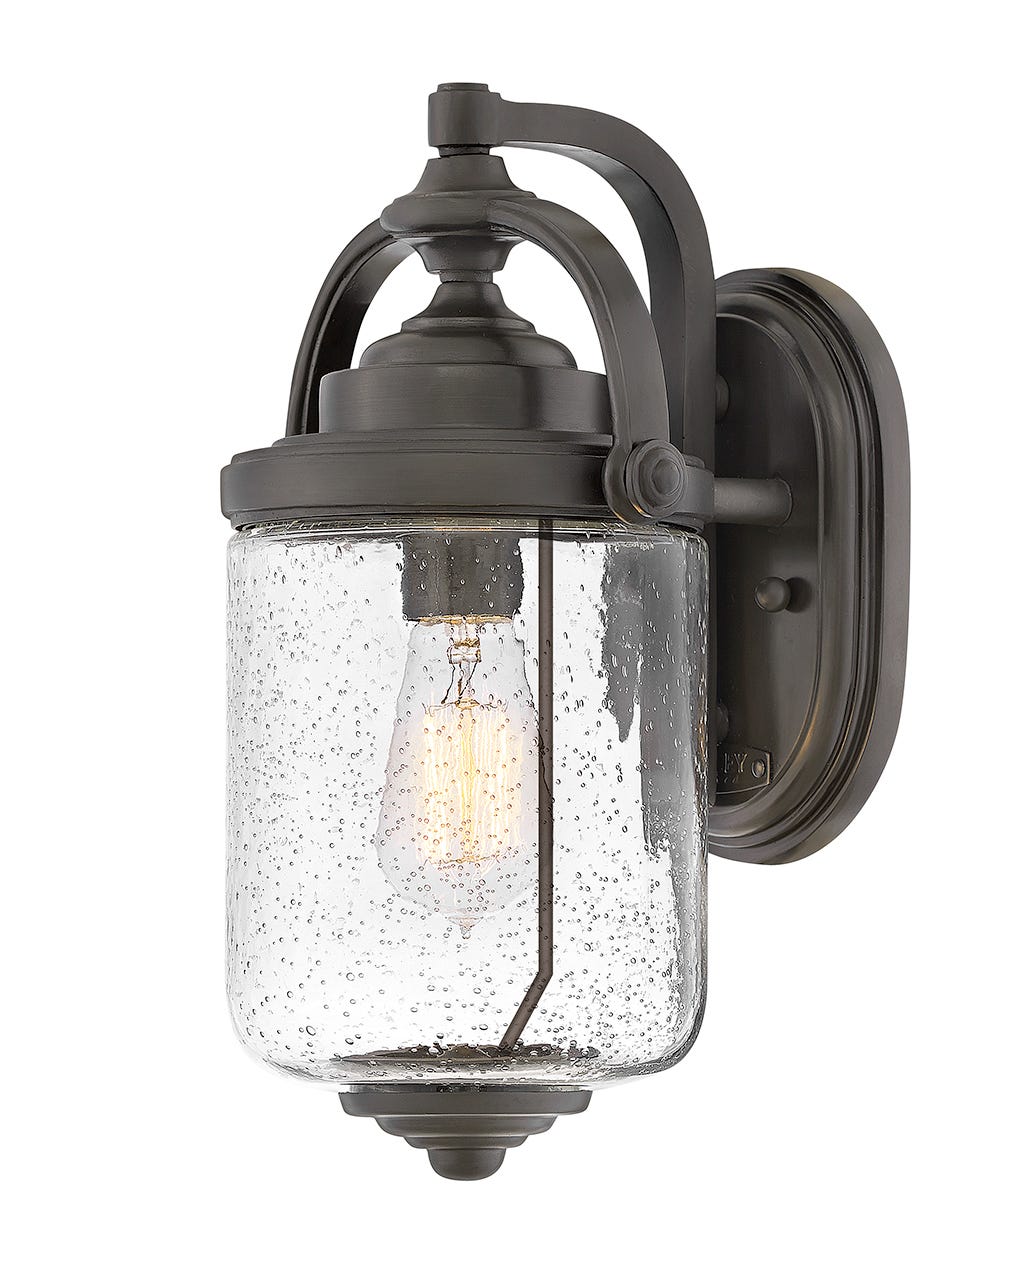 OUTDOOR WILLOUGHBY Wall Mount Lantern